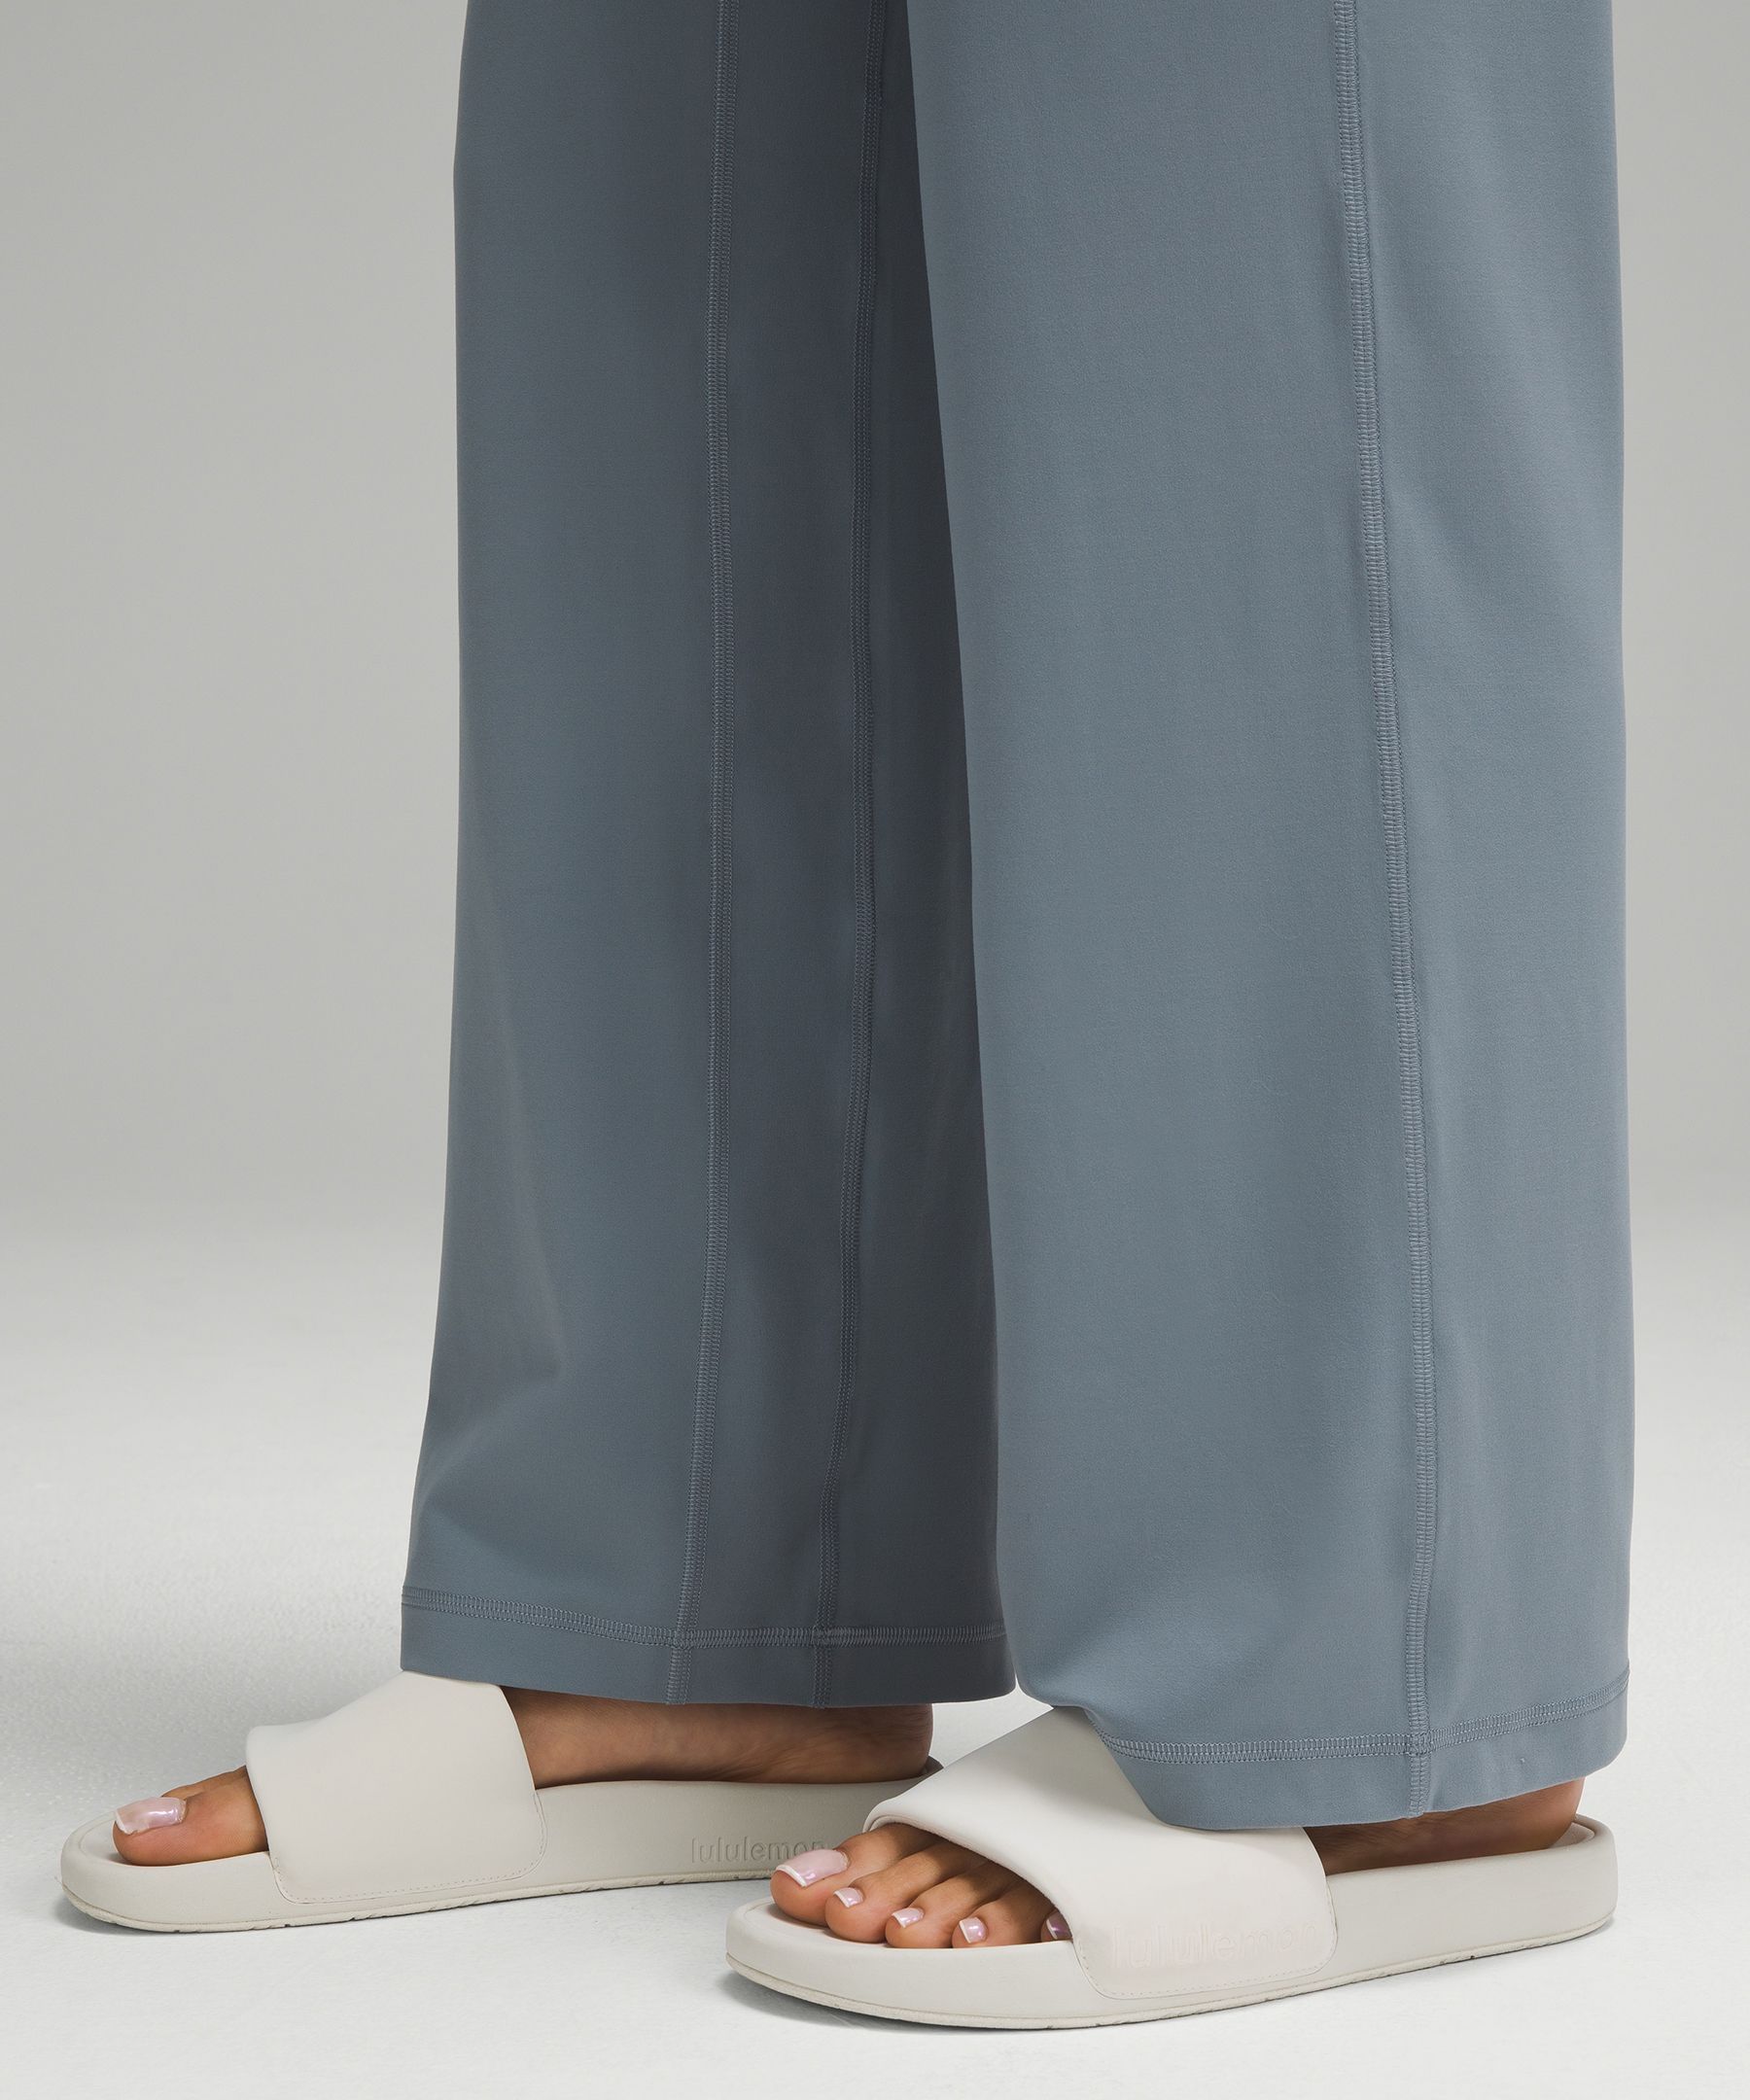 Lululemon Align High-Rise Wide Leg Pant 31Hawaiian Blue Size 6 NWT - $120  New With Tags - From MyArt